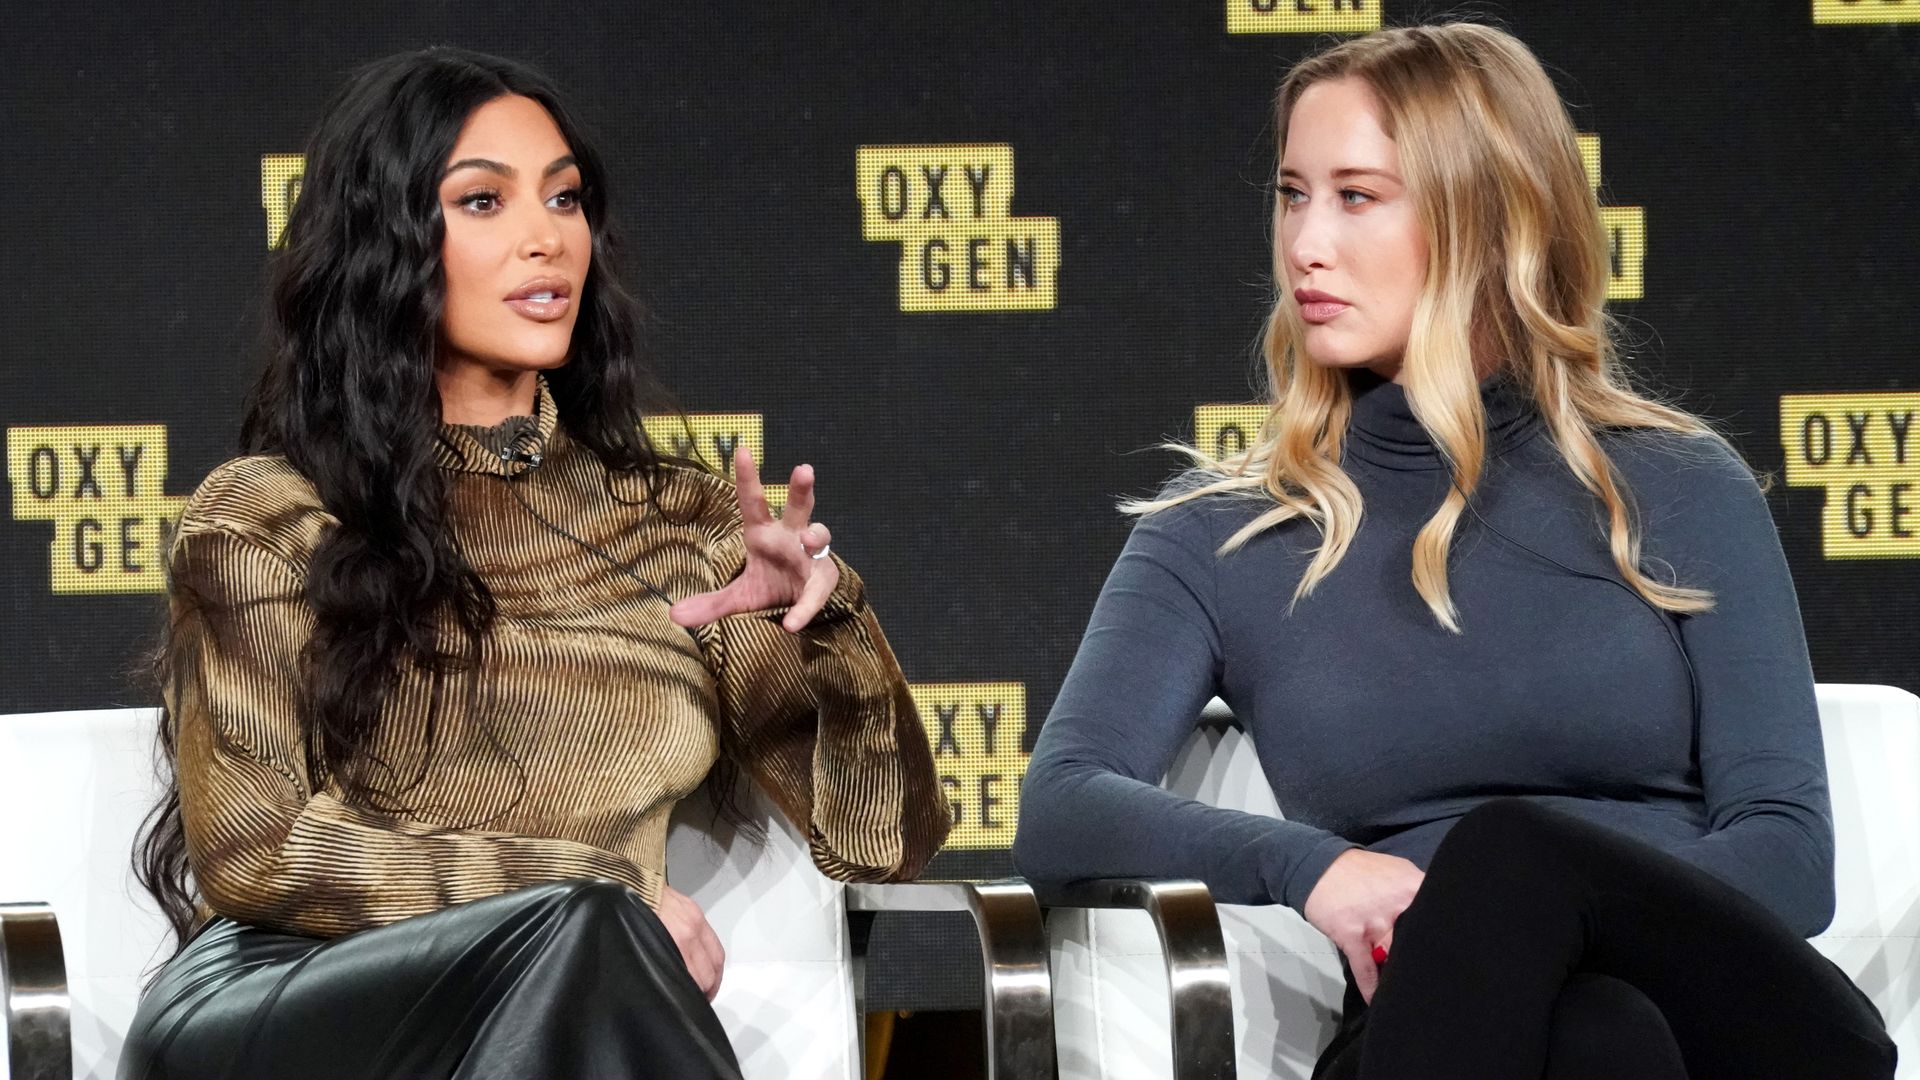 Kim and Jessica sat on stage discussing The Justice Project